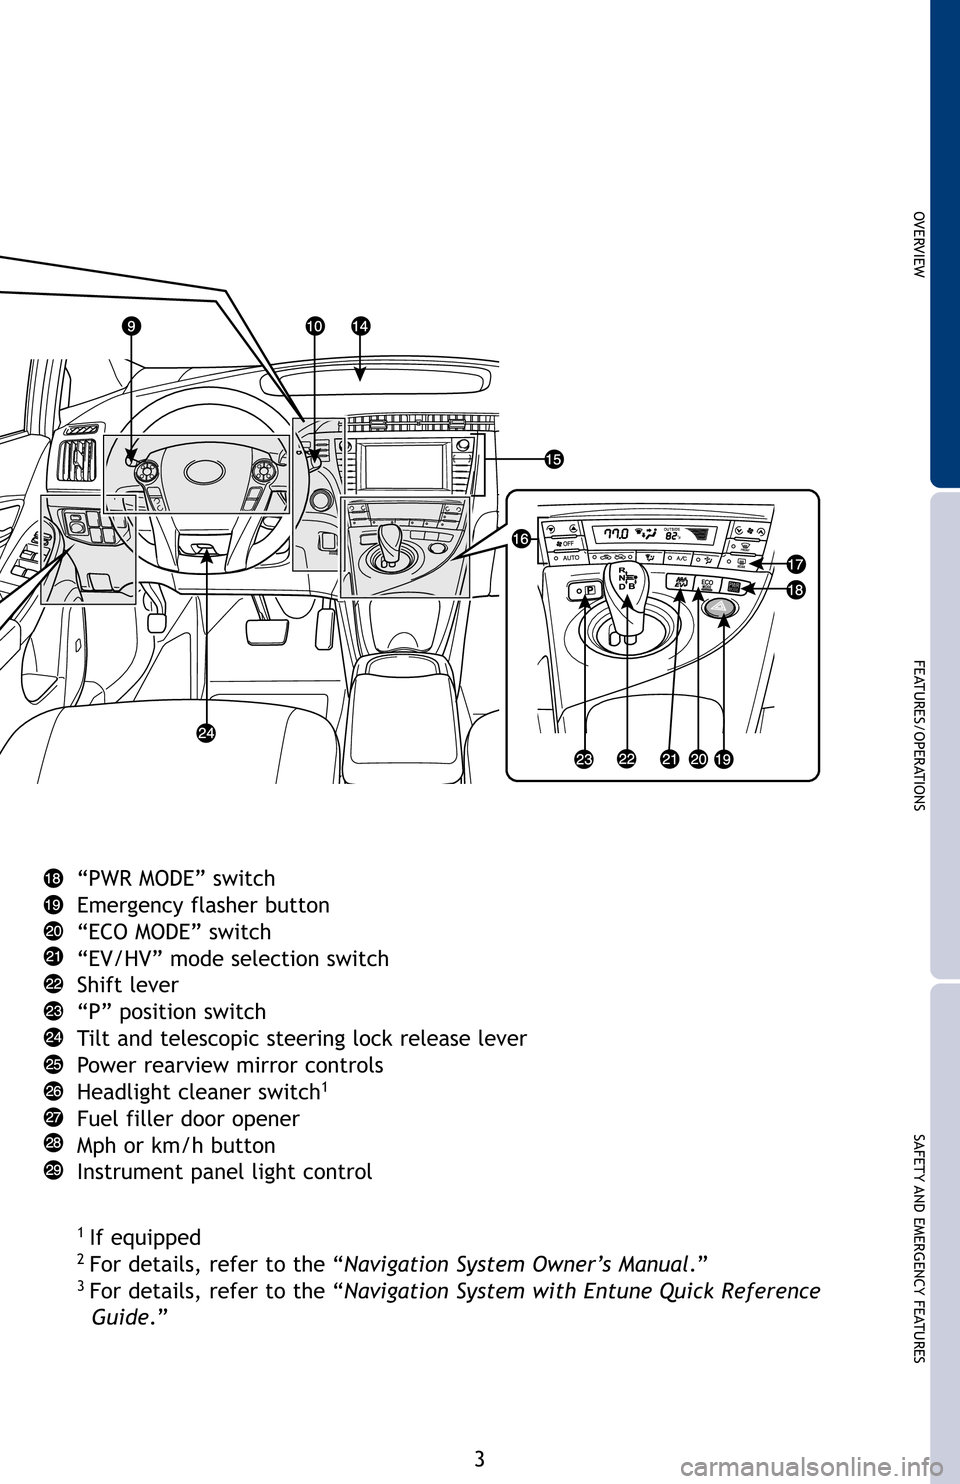 TOYOTA PRIUS PLUG-IN HYBRID 2012 1.G Quick Reference Guide OVERVIEW
FEATURES/OPERATIONS
SAFETY AND EMERGENCY FEATURES
3
“PWR MODE” switch
Emergency flasher button
“ECO MODE” switch
“EV/HV” mode selection switch
Shift lever
“P” position switch
